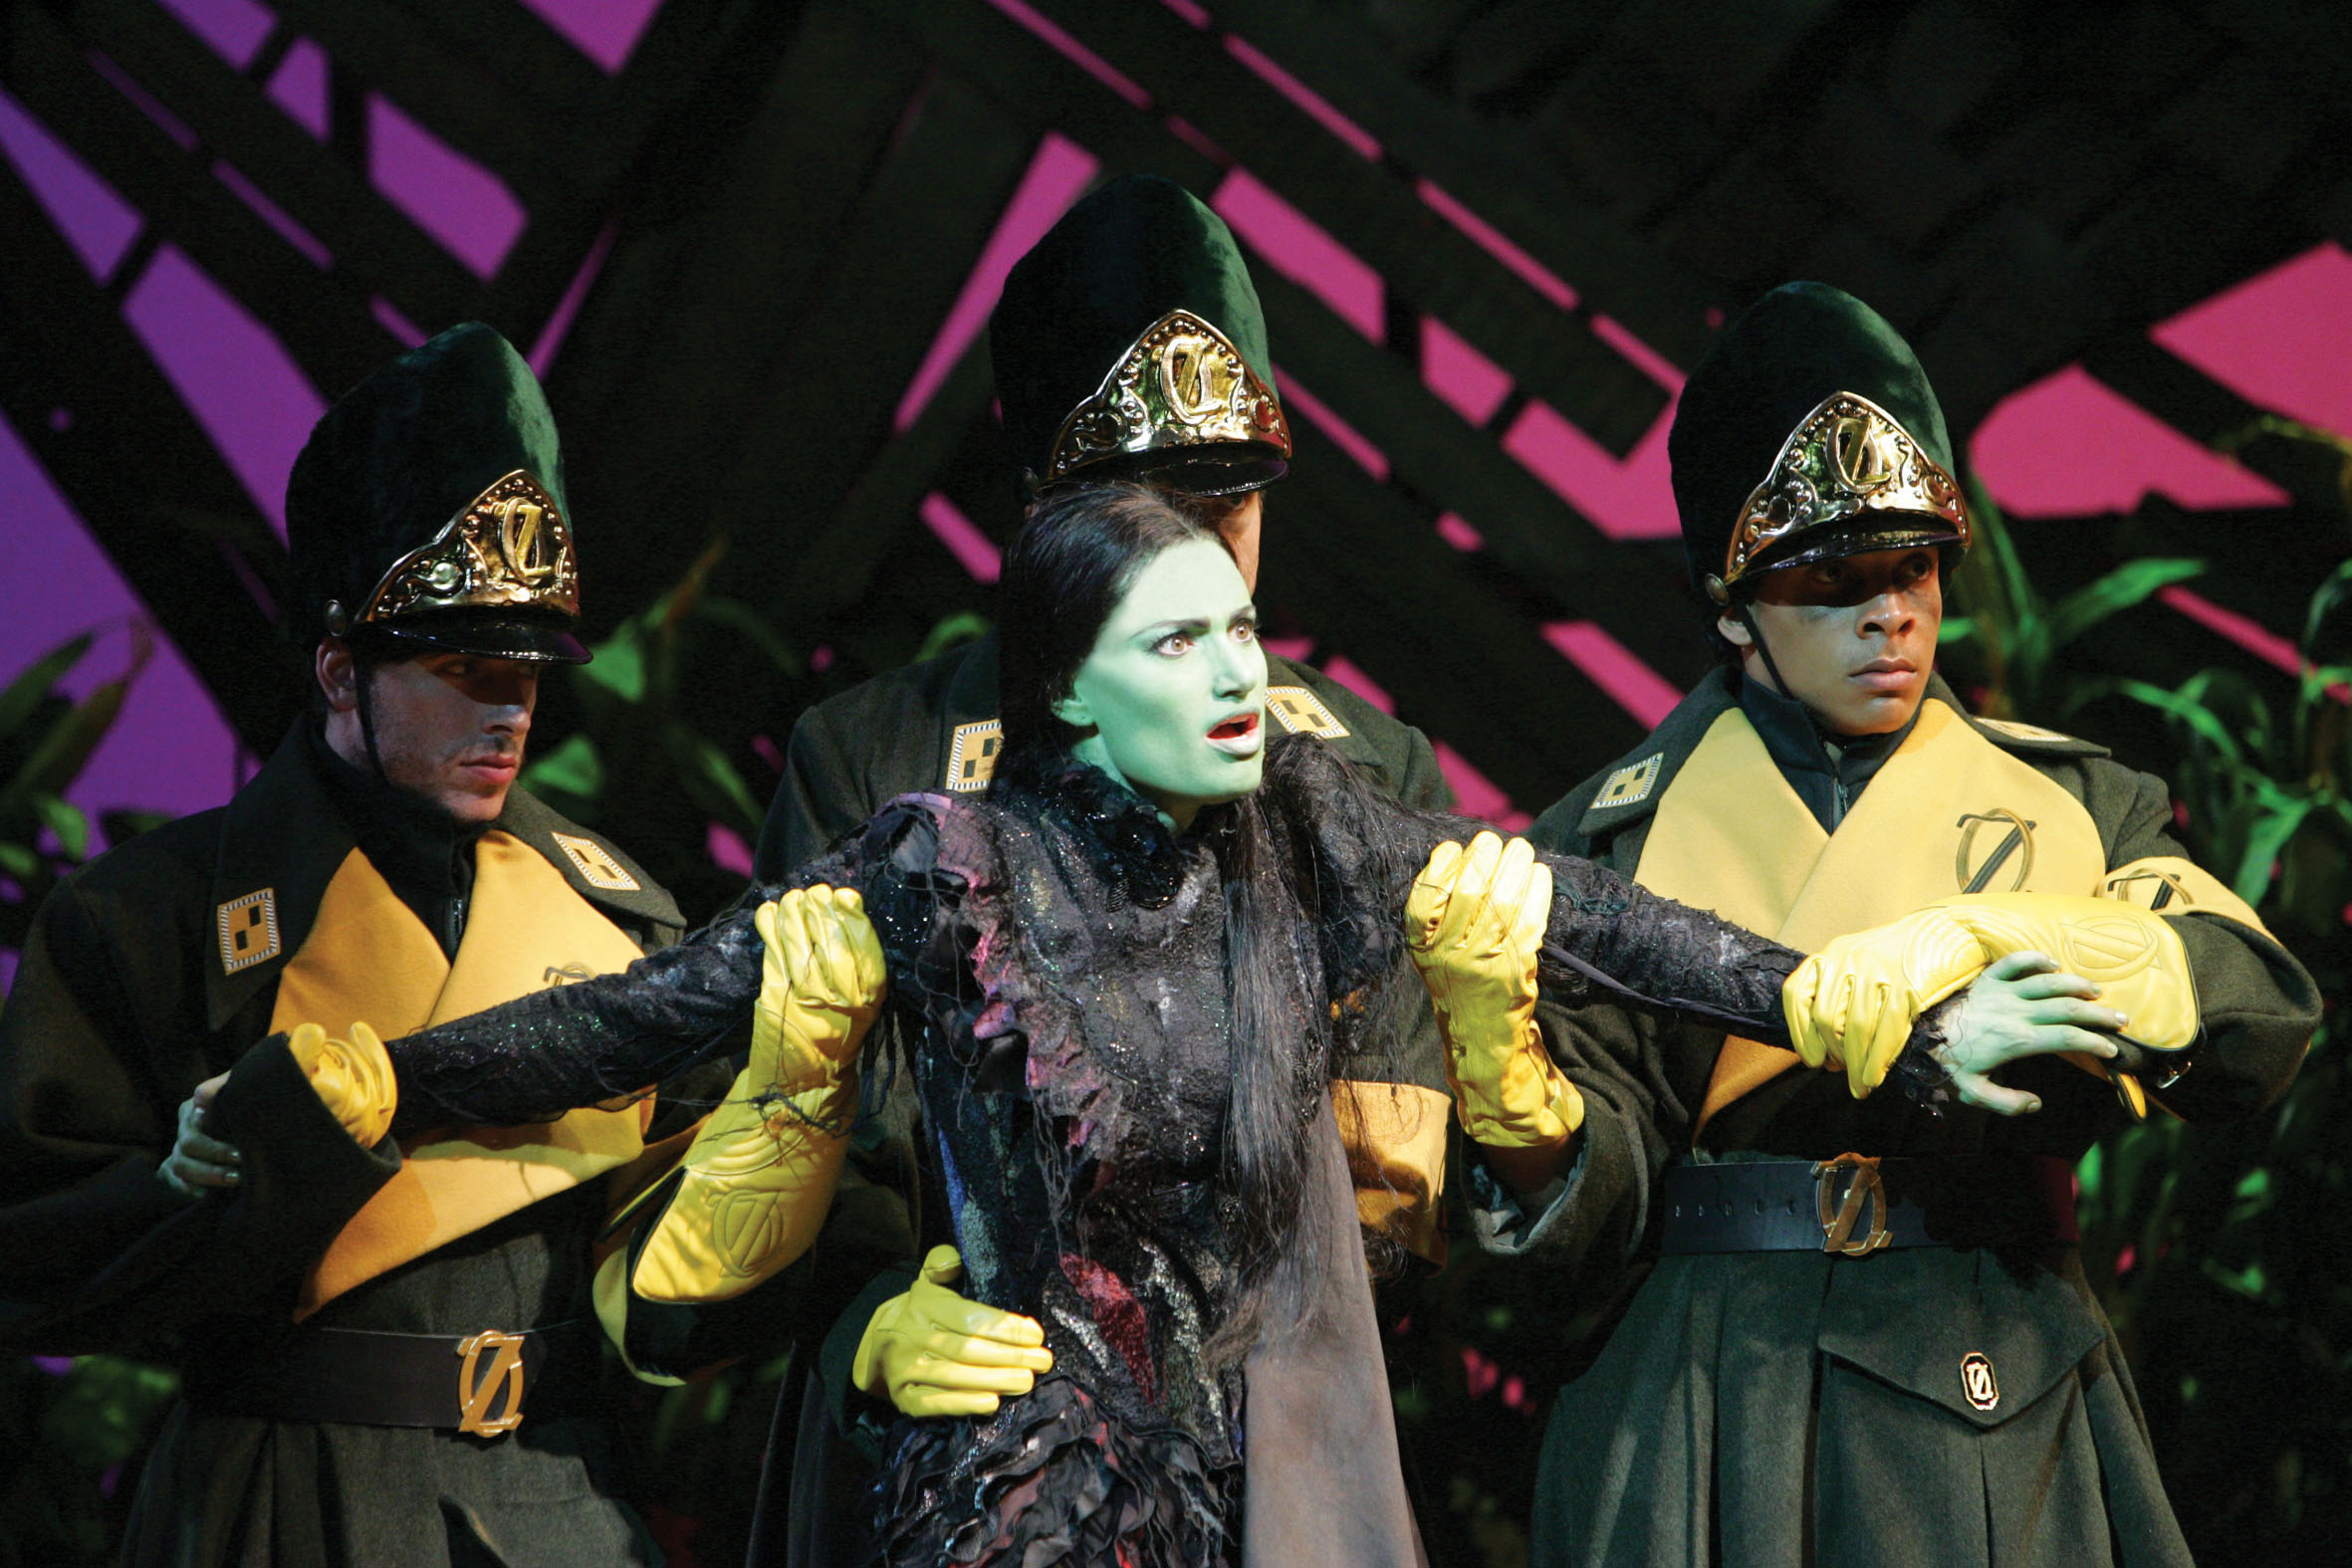 'Wicked' Movie Musical to Fly Into Theaters Christmas 2021 Bloomberg